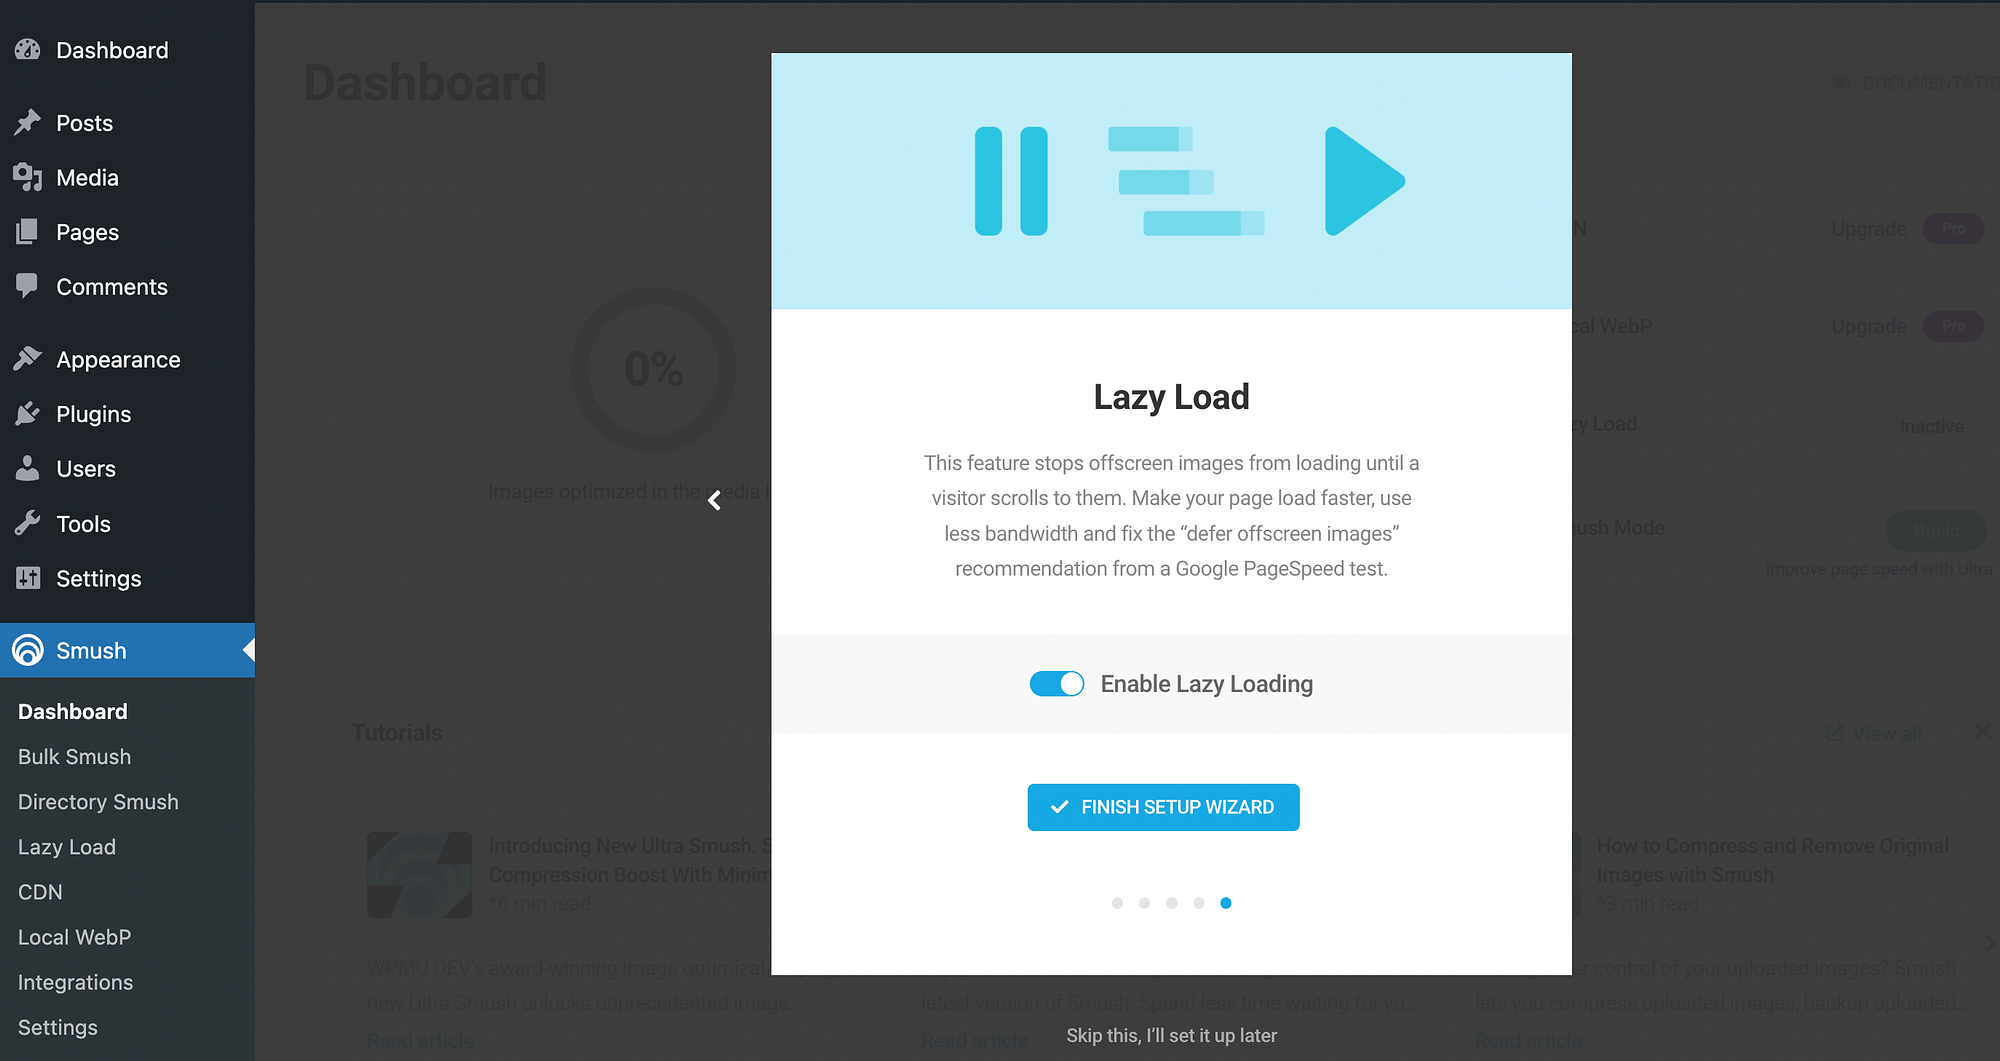 Enable lazy loading in Smush's setup wizard.